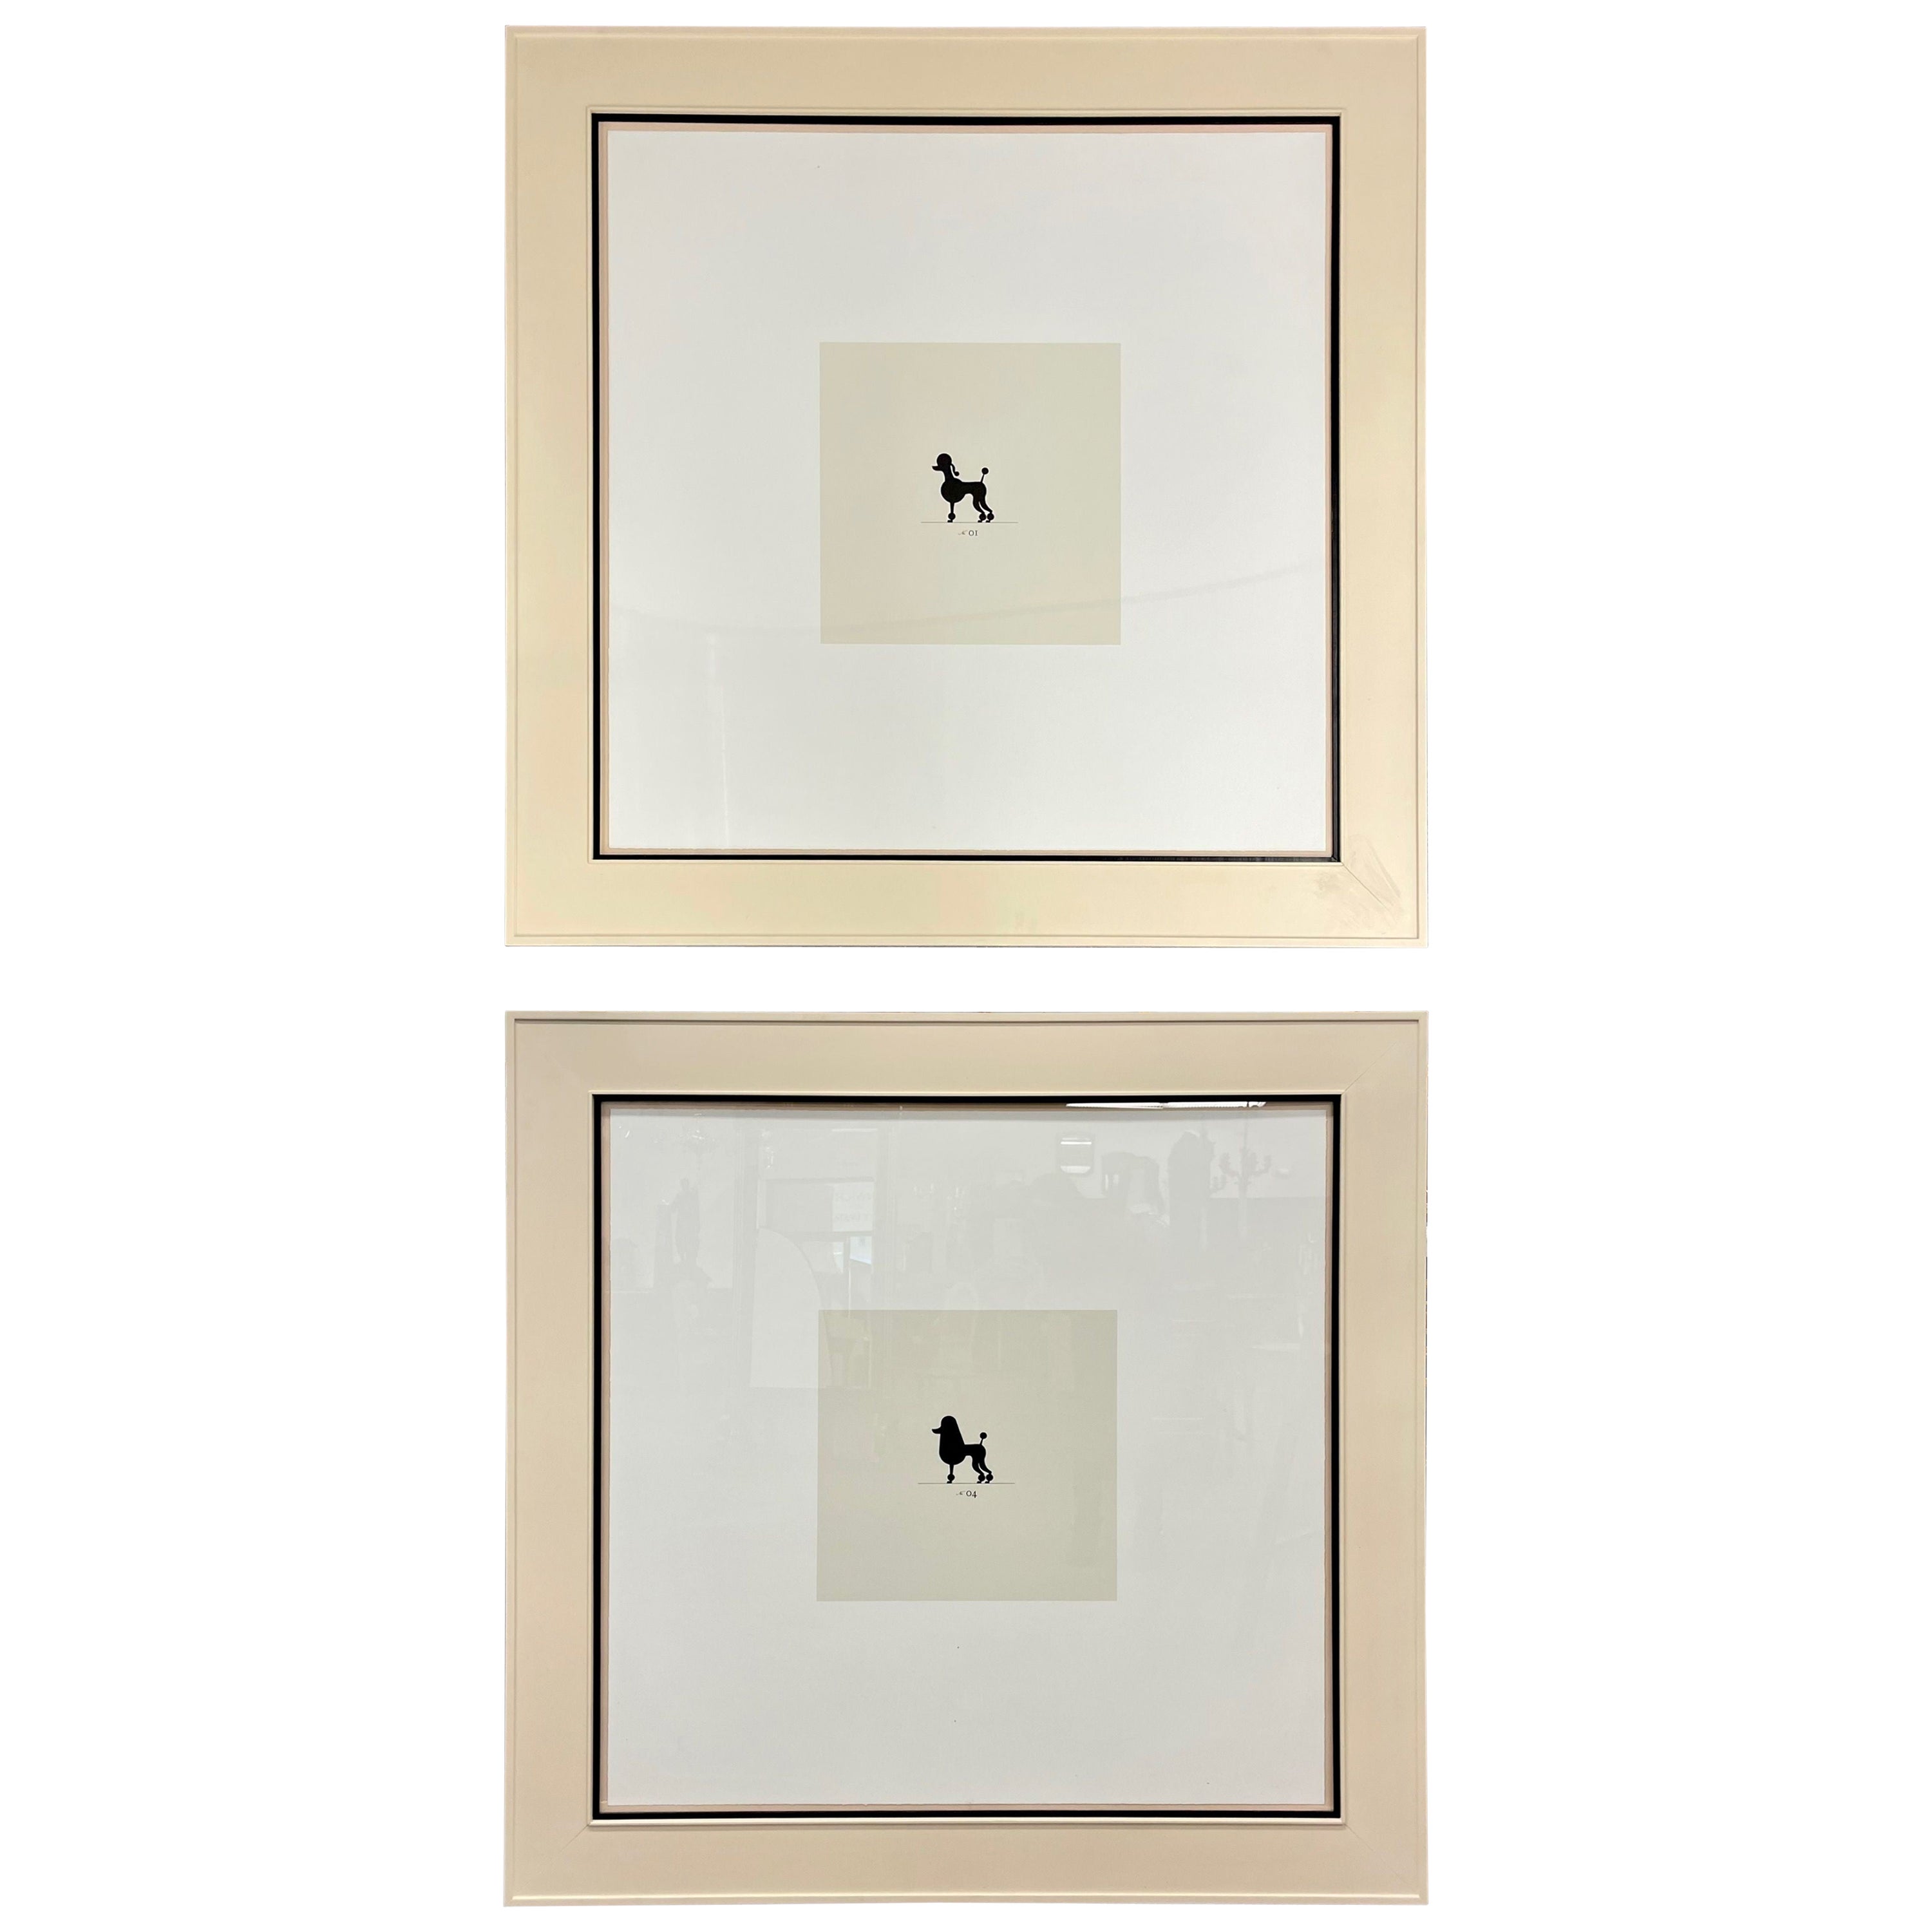 Two Large Poodles Silhouette in Custom Matted Frames